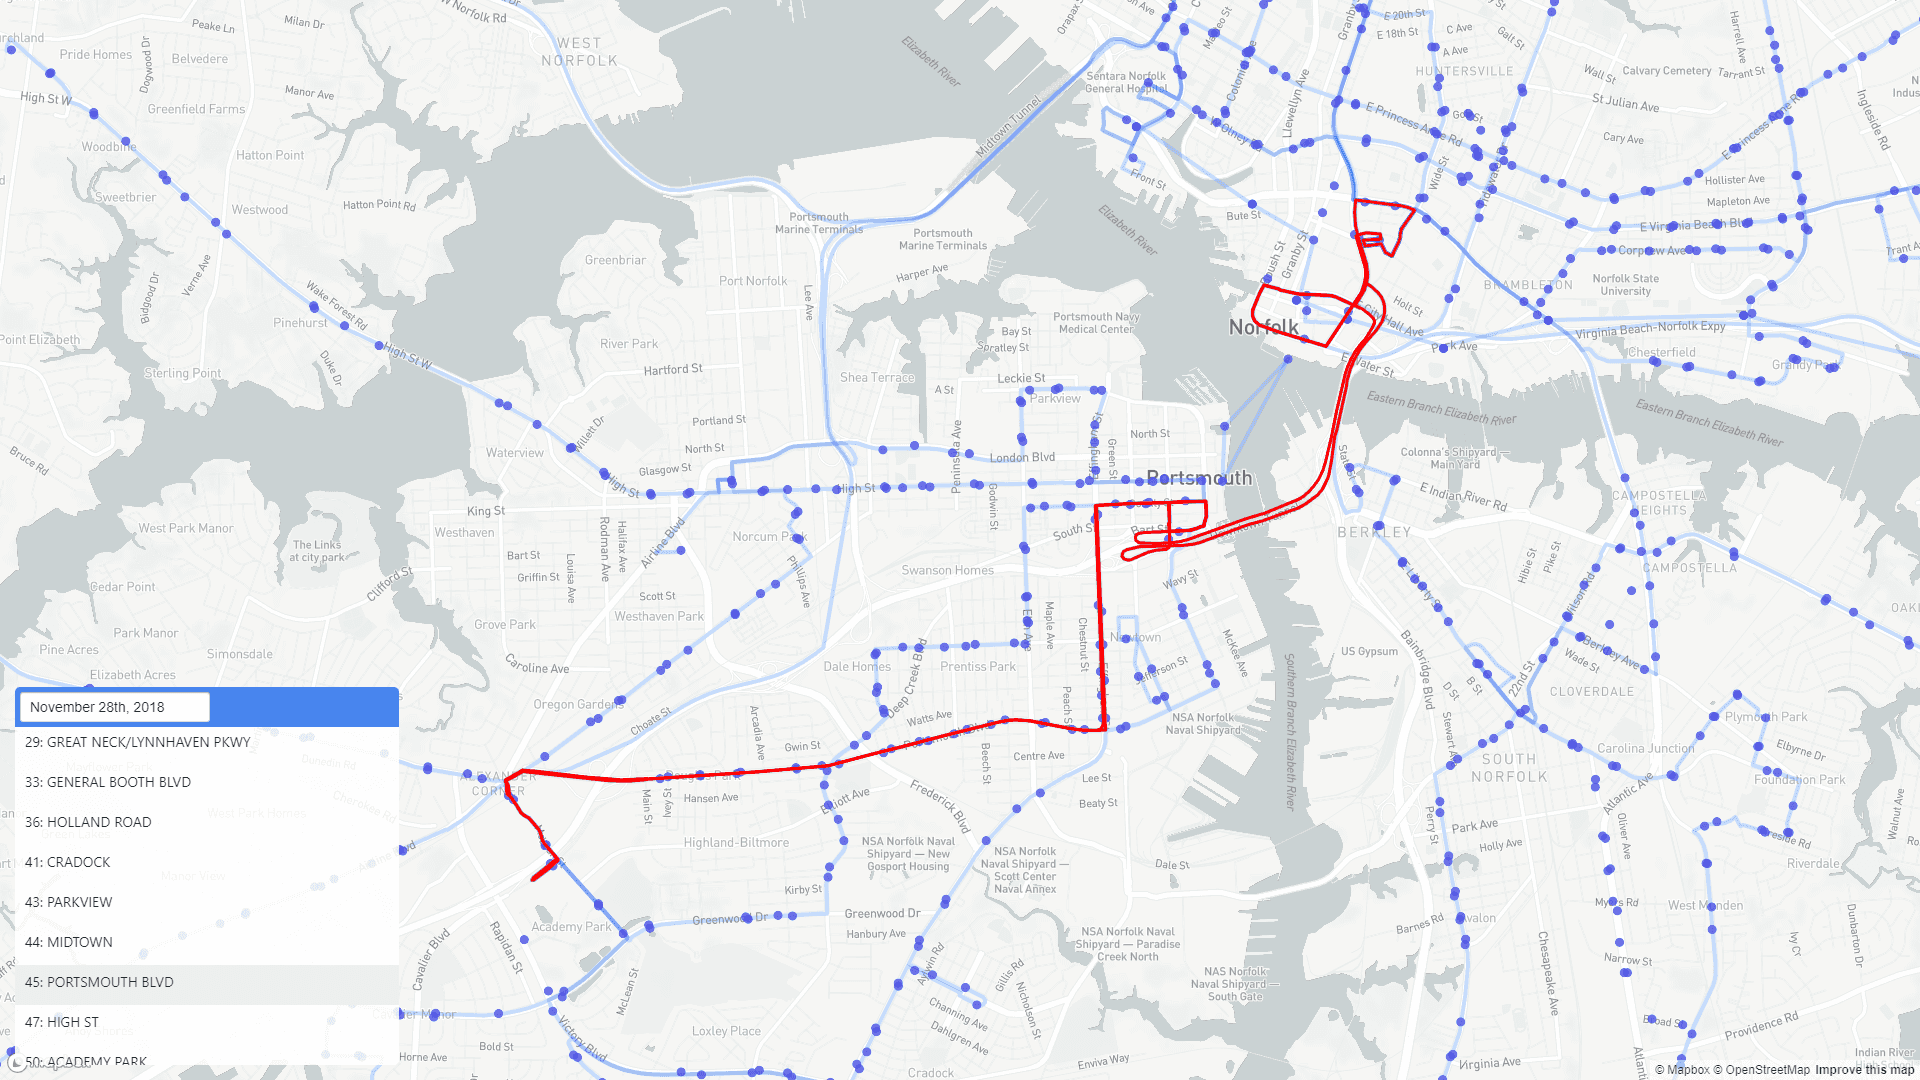 Map centered on Portsmouth, VA with a bus route highlighted